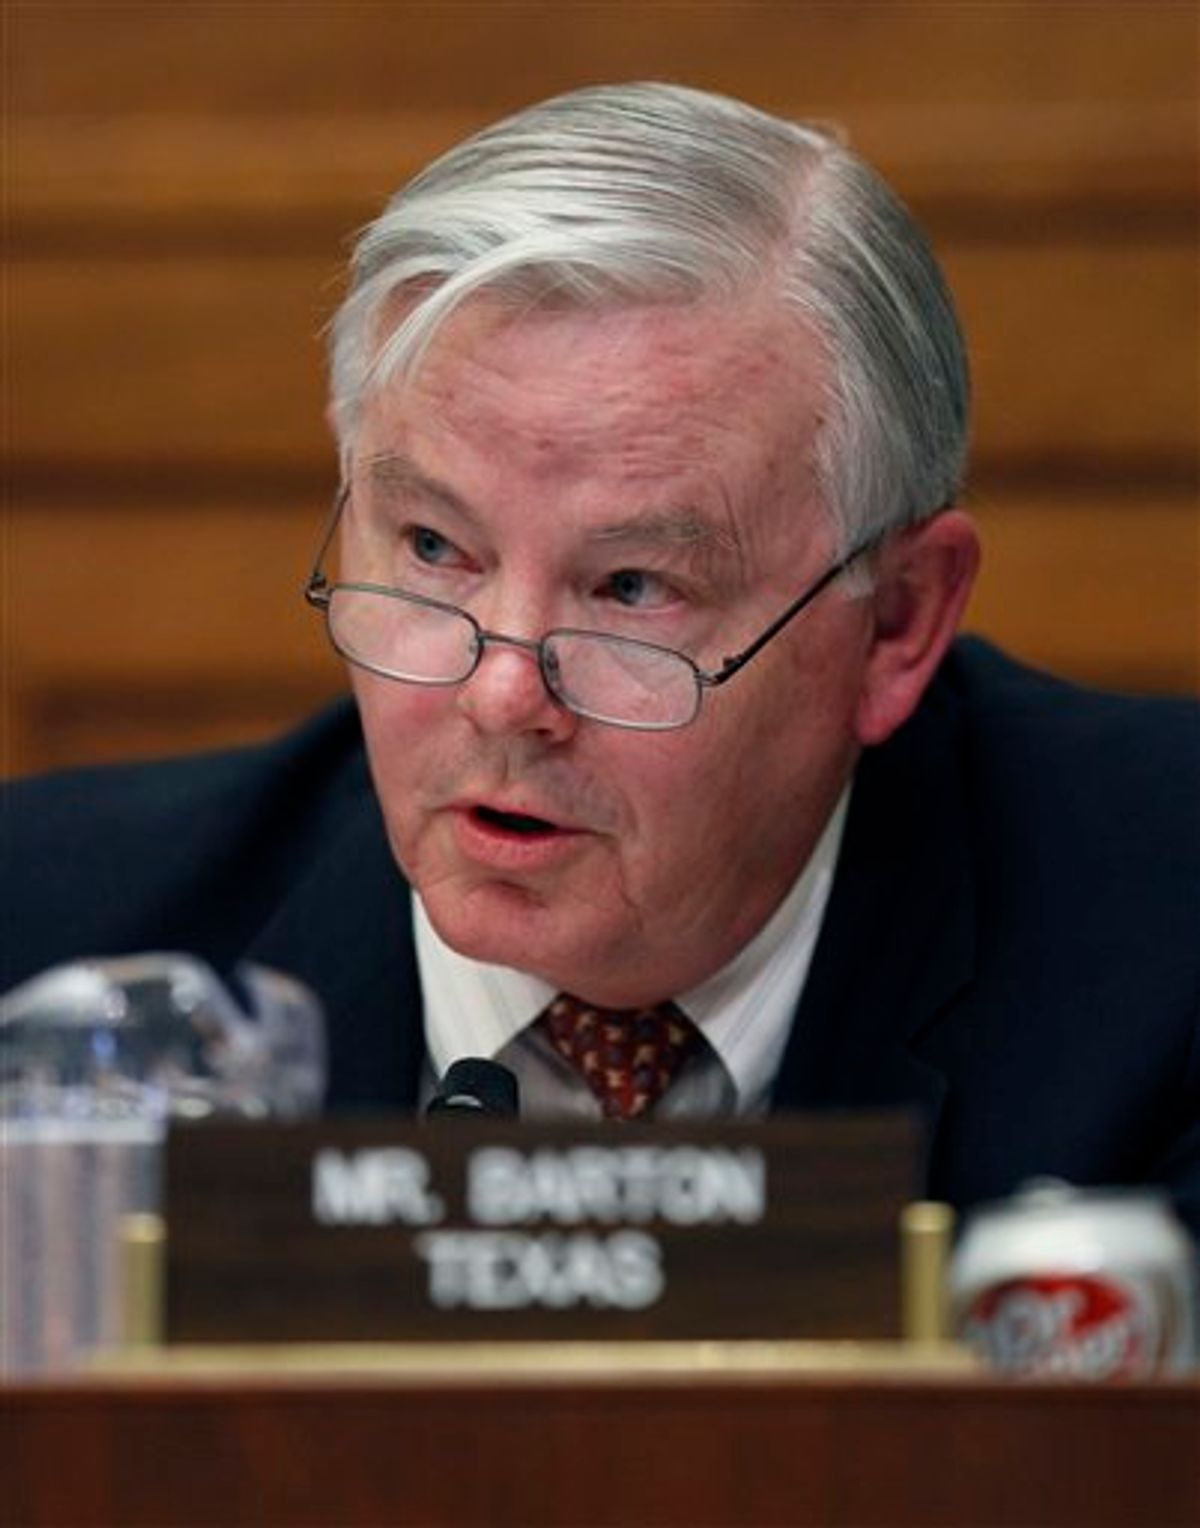 Rep. Joe Barton, R-Texas questions BP CEO Tony Hayward, on Capitol Hill in Washington, Thursday, June 17, 2010,  during the House Oversight and Investigations subcommittee hearing on "the role of BP in the Deepwater Horizon Explosion and oil spill. (AP Photo/Alex Brandon)  (AP)